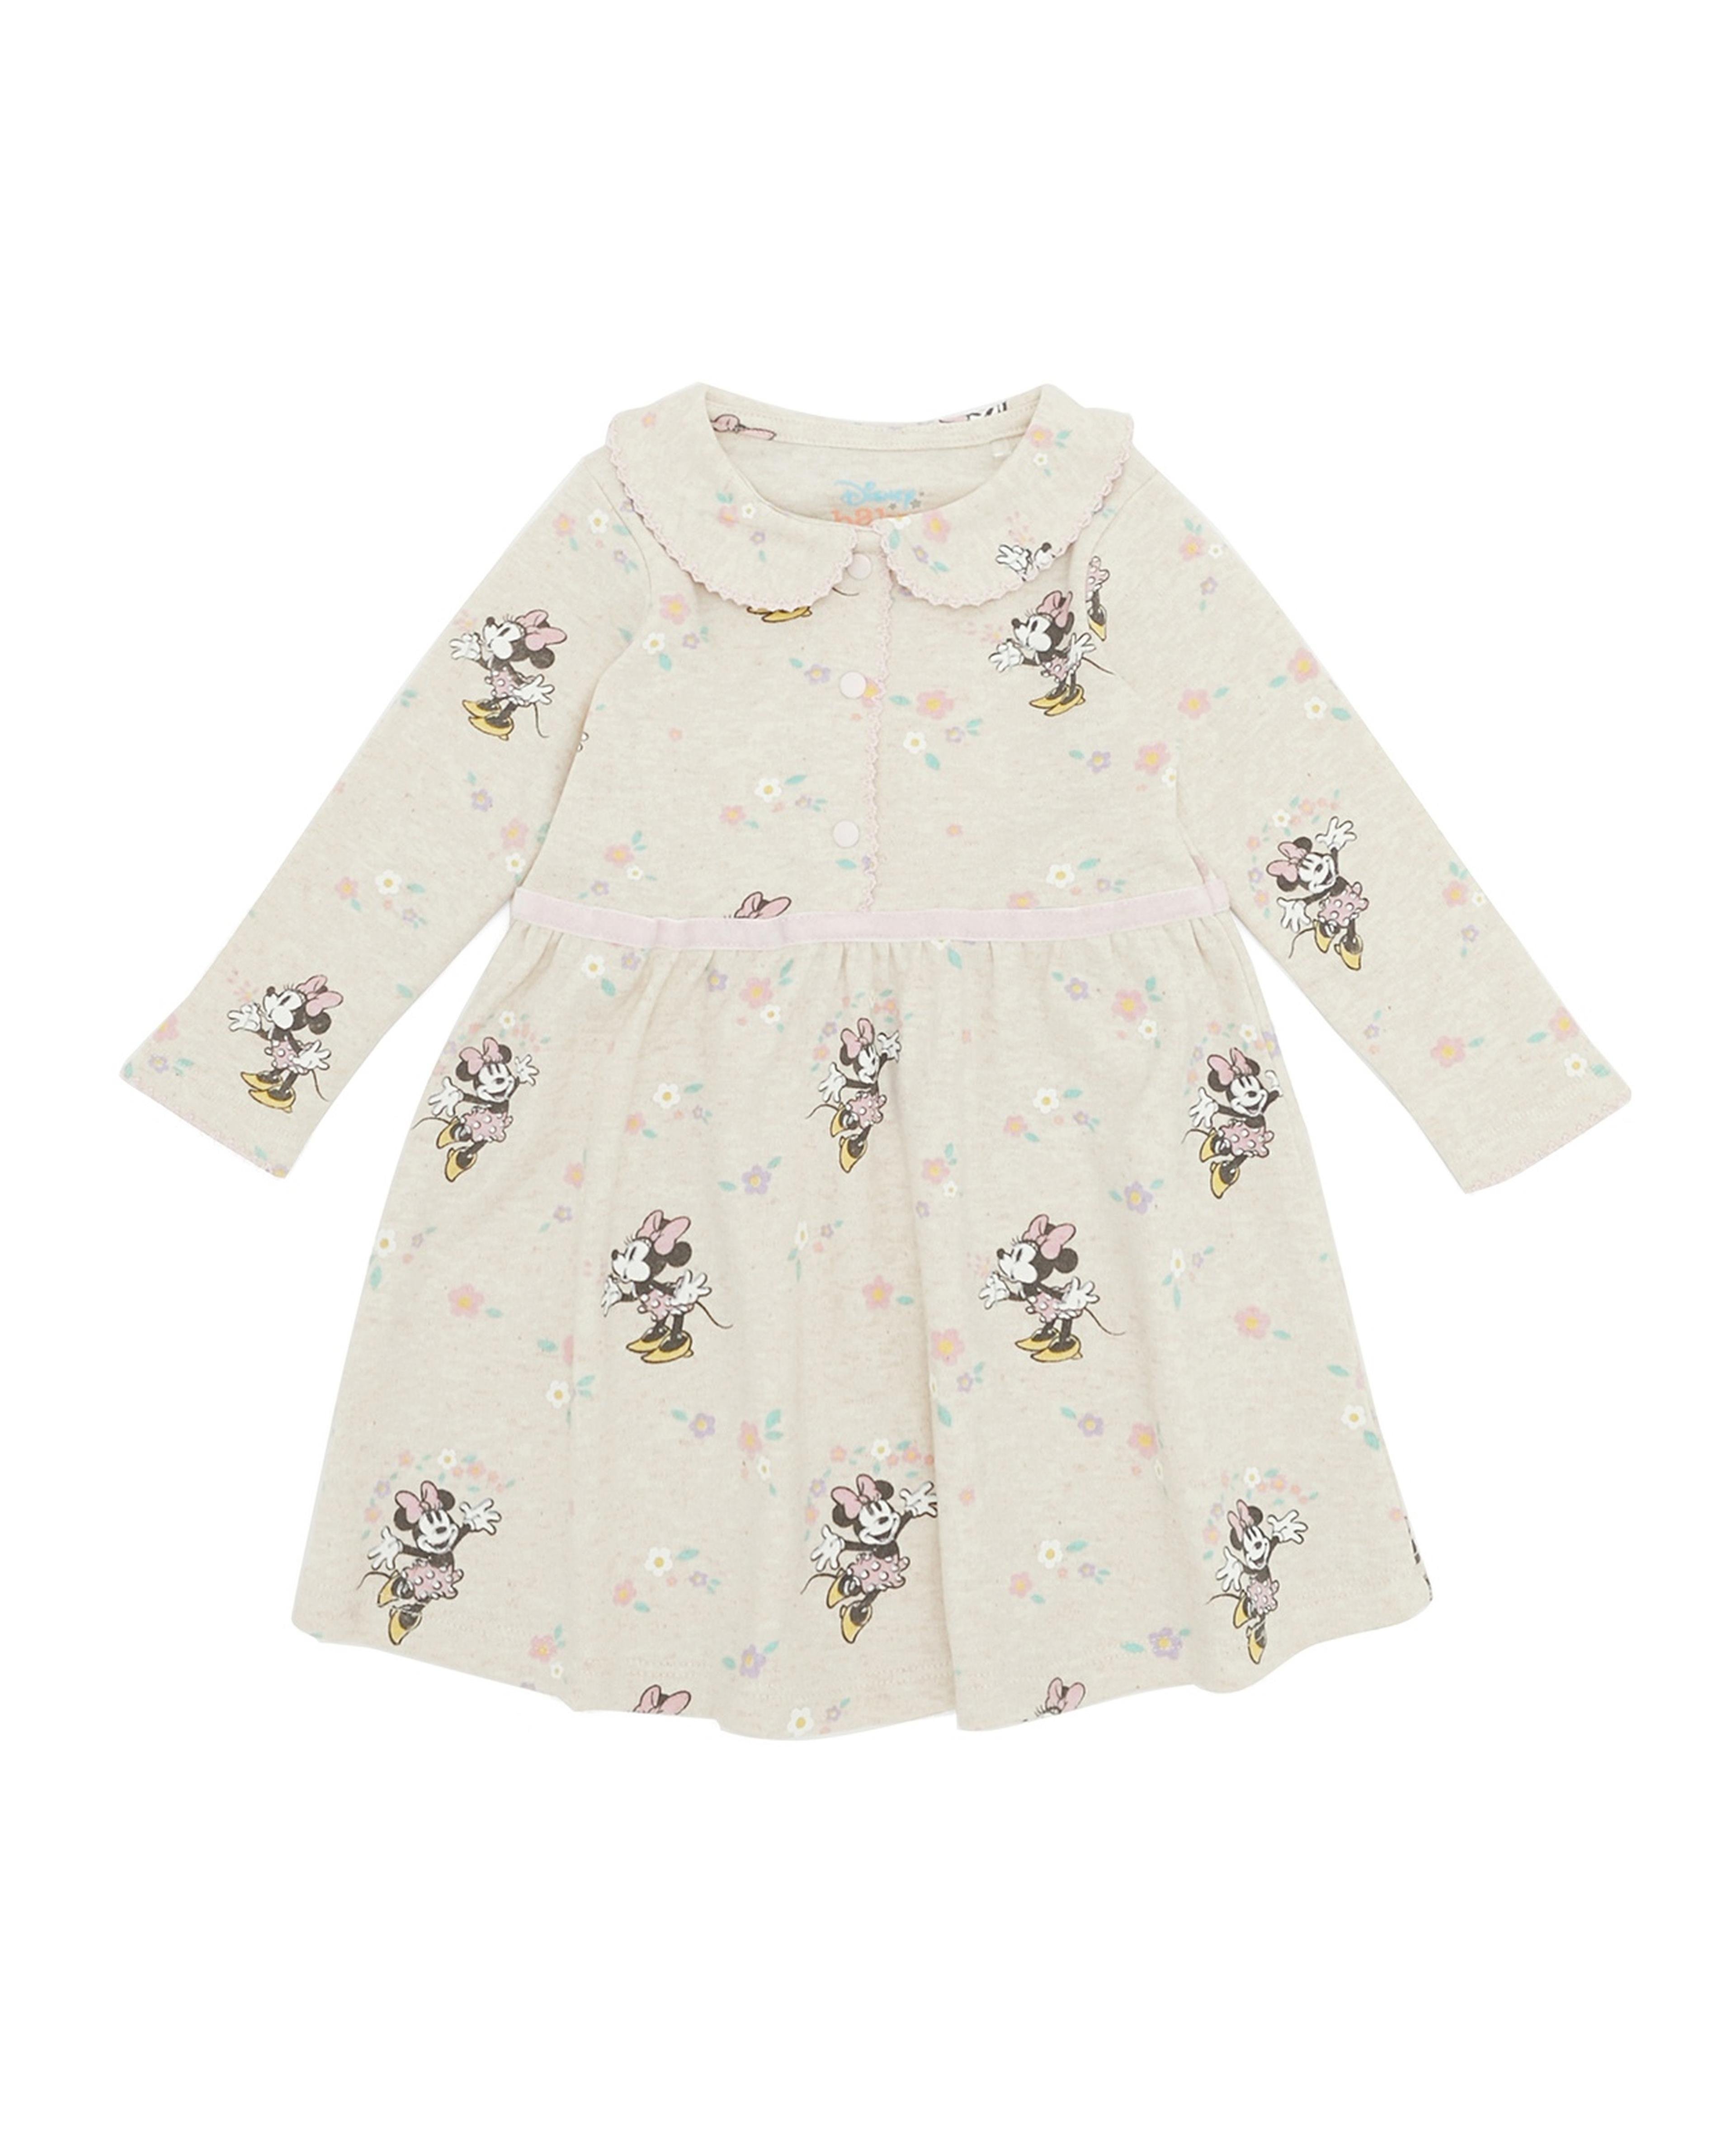 Minnie Mouse Print with Peter Pan Collar and Long Sleeves